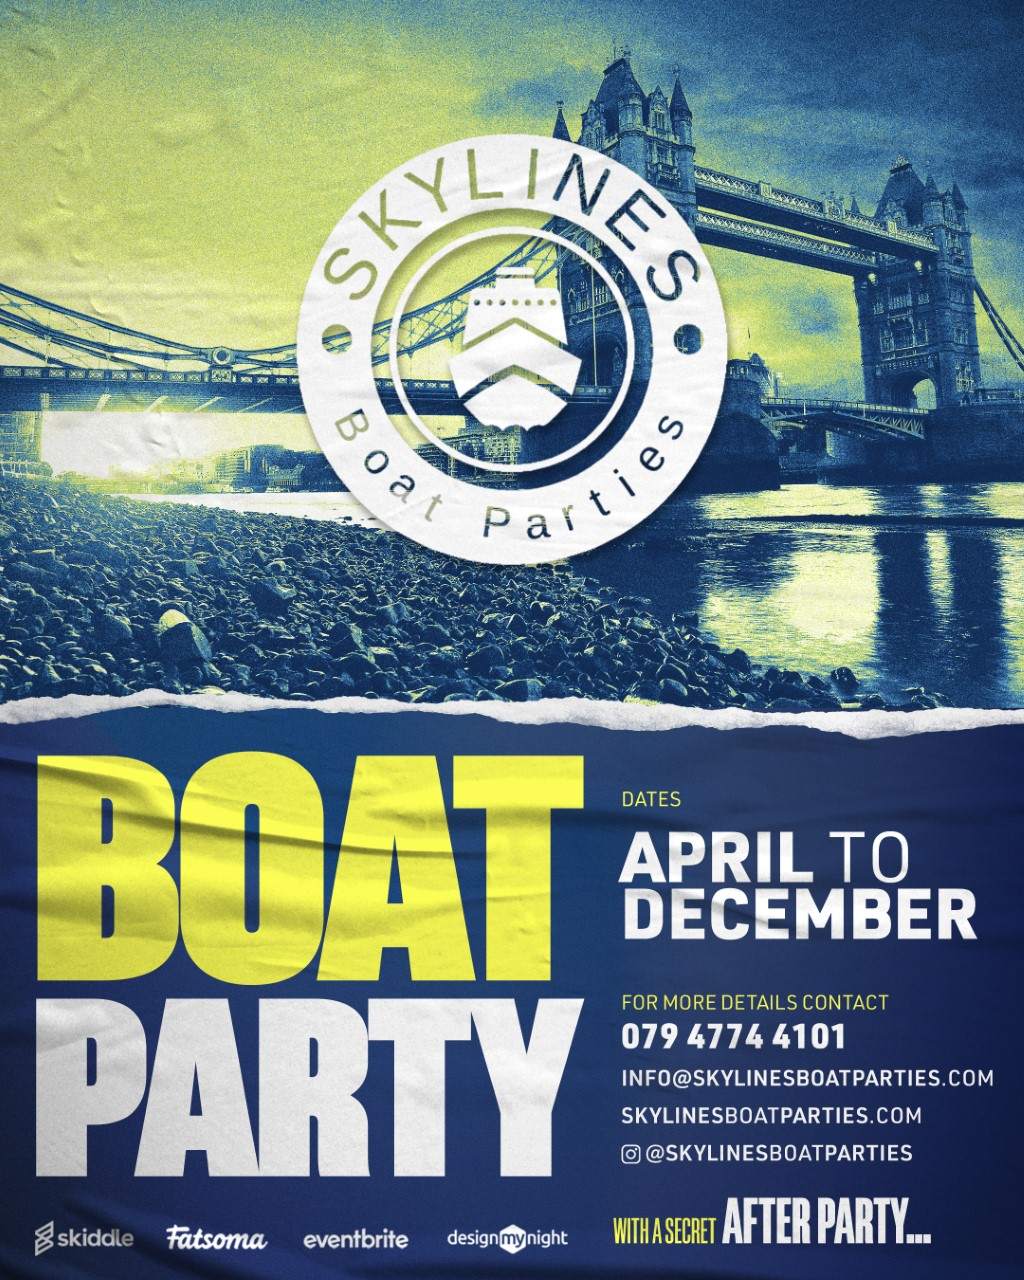 BOAT CELEBRATIONS ON THE THAMES WITH A SECRET AFTER PARTY AT EGG LONDON - Página trasera